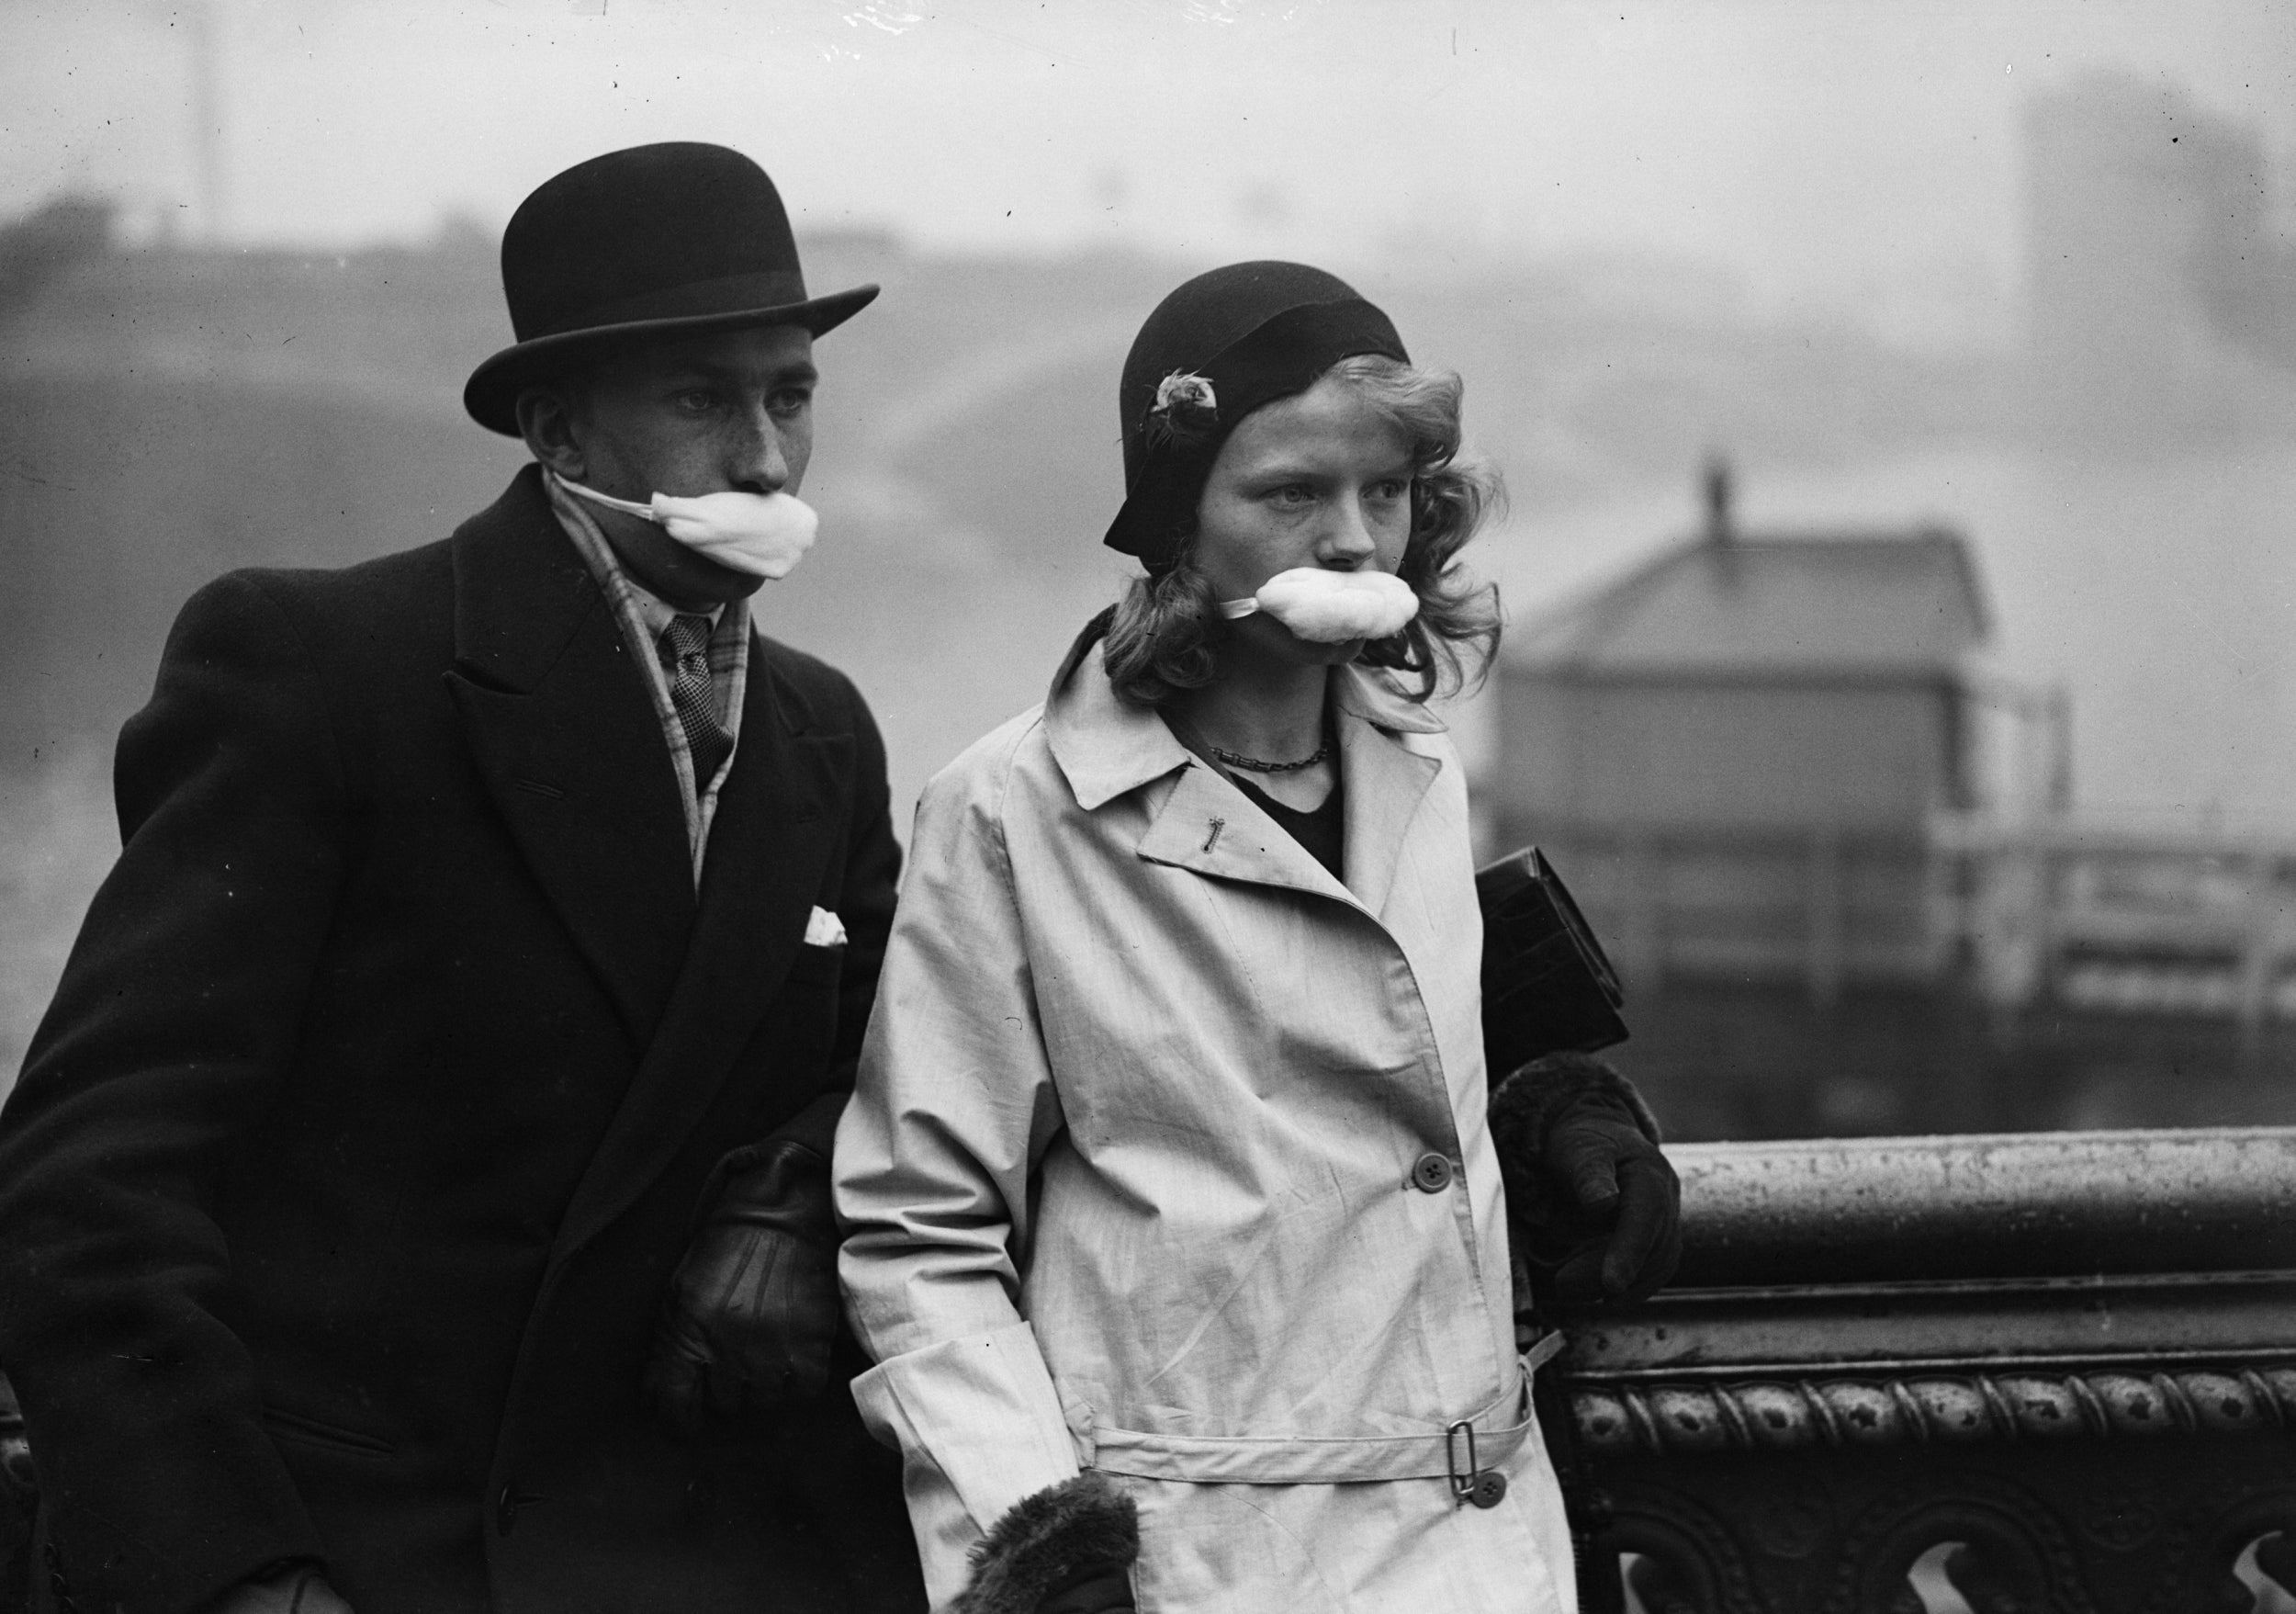 Londoners wear masks in a bid to stave off the flu in the 1940s